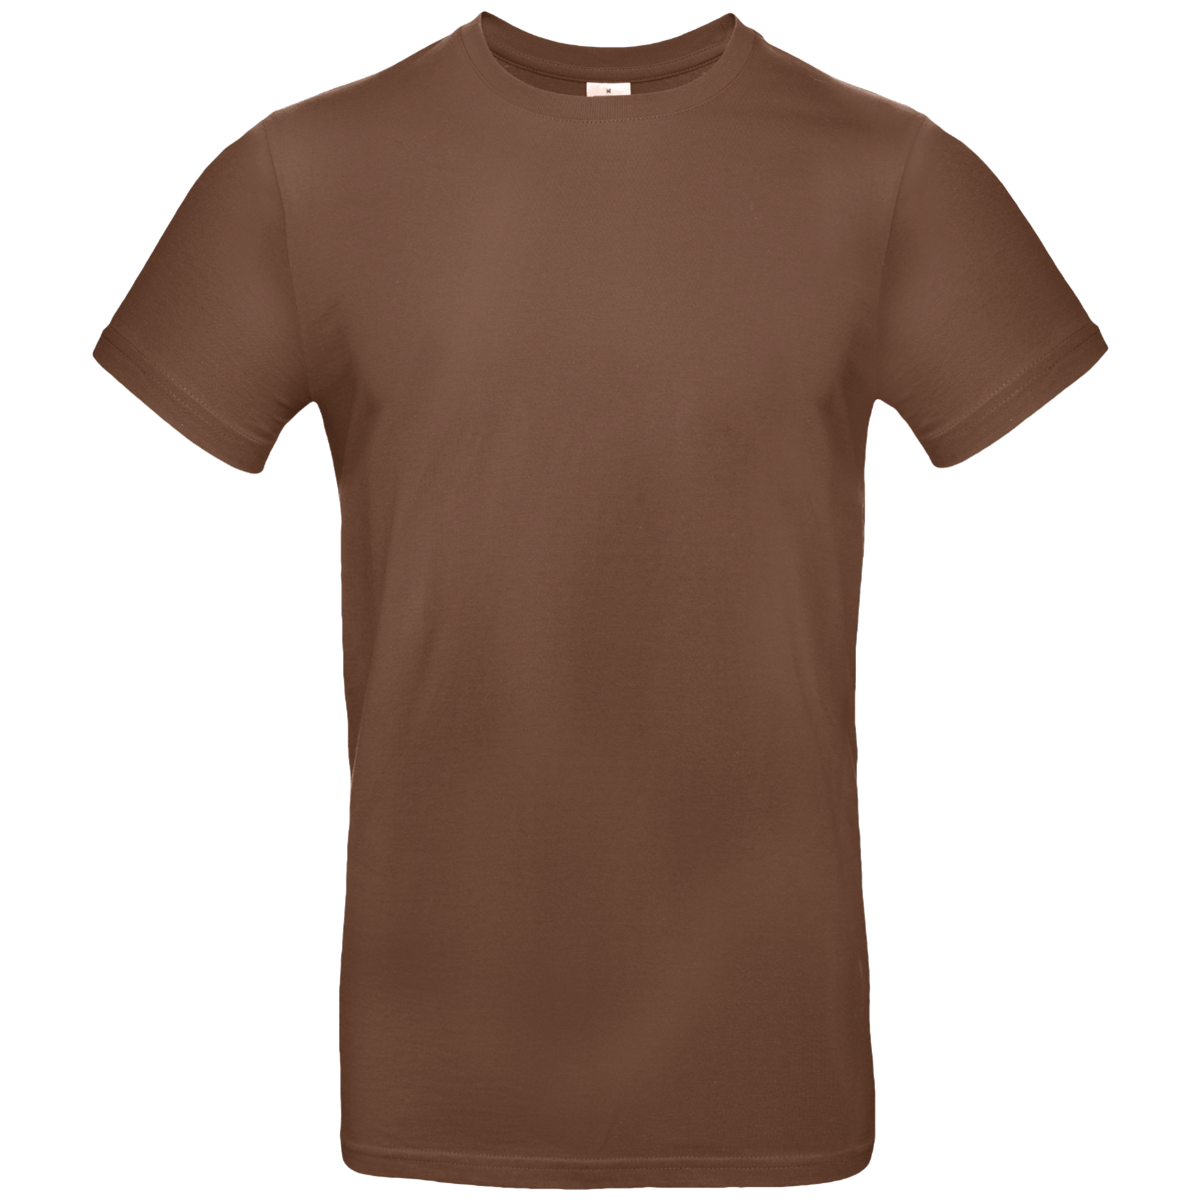 Tee-Shirt Homme Personnalisable Sur Tunetoo Chocolate